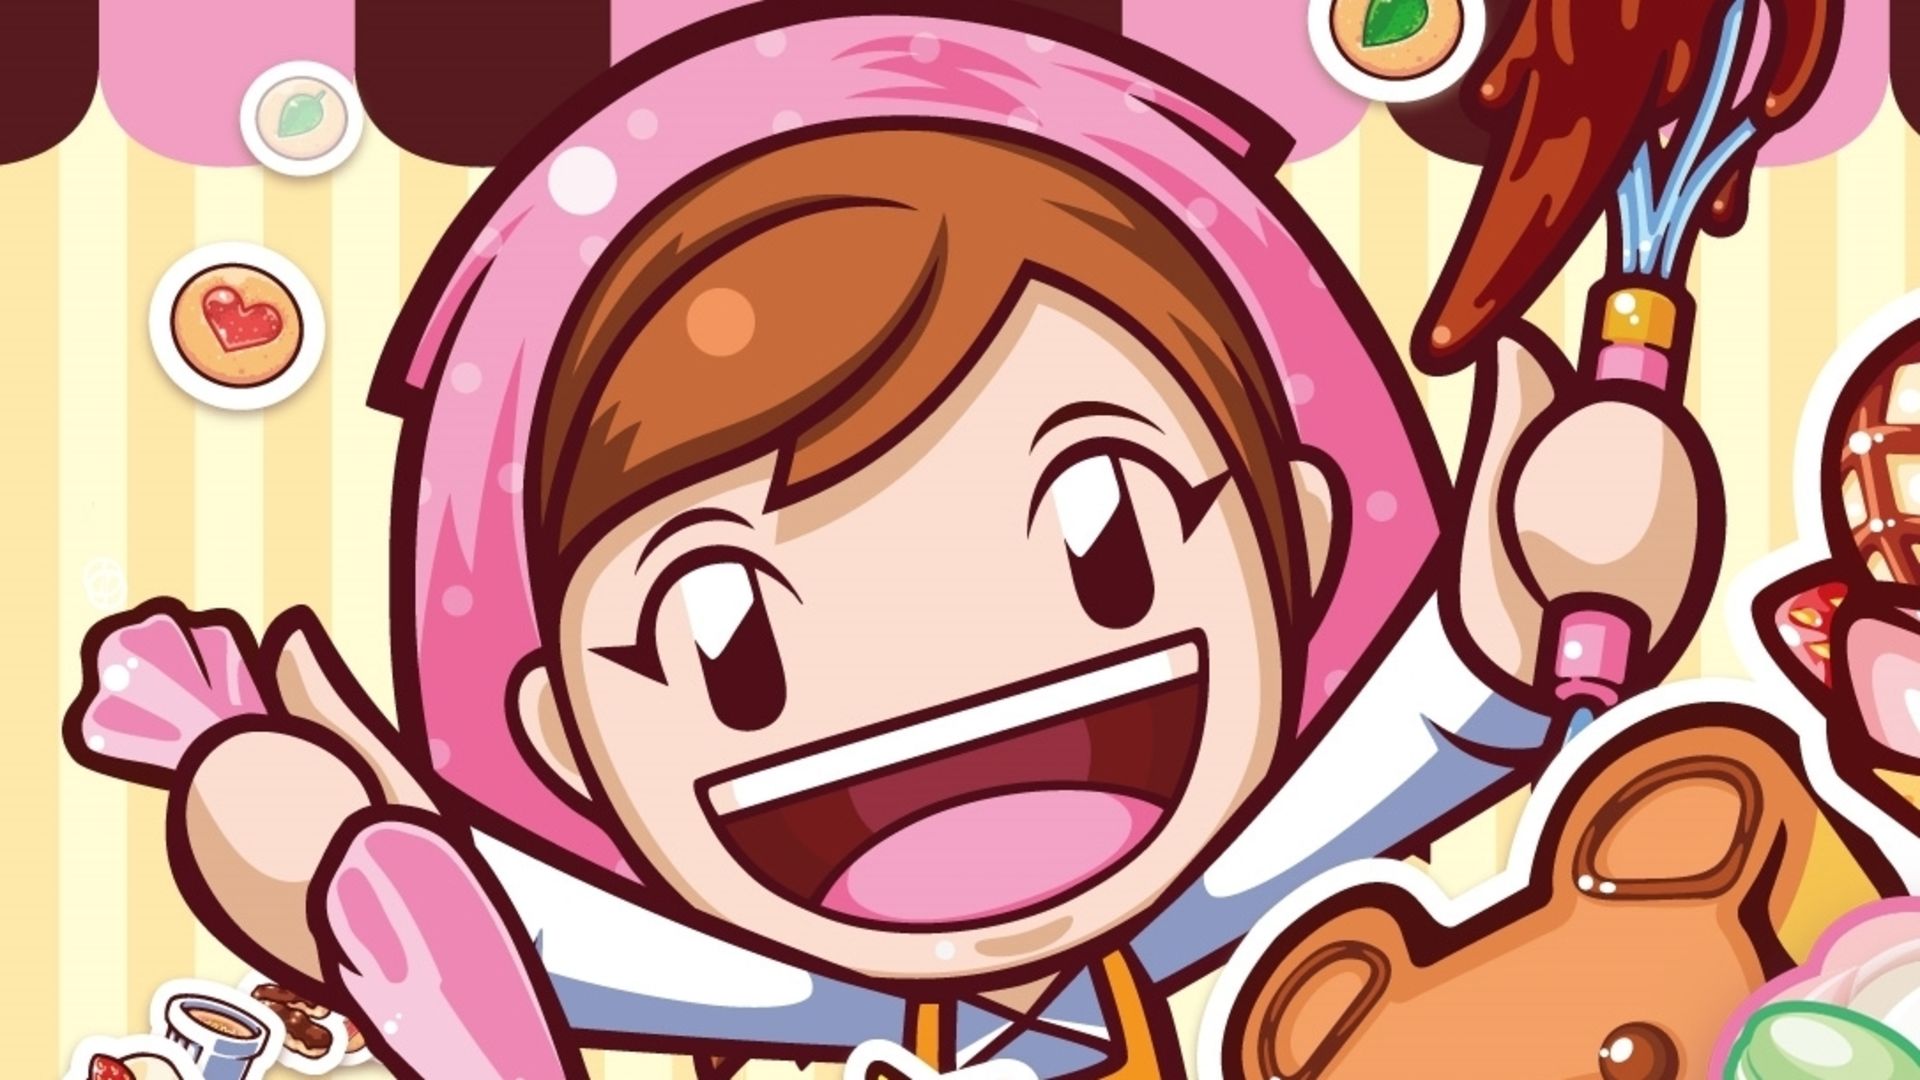 Image for Cooking Mama: Cookstar Not on eShop Because "Whole World Is Upside Down With Delays"